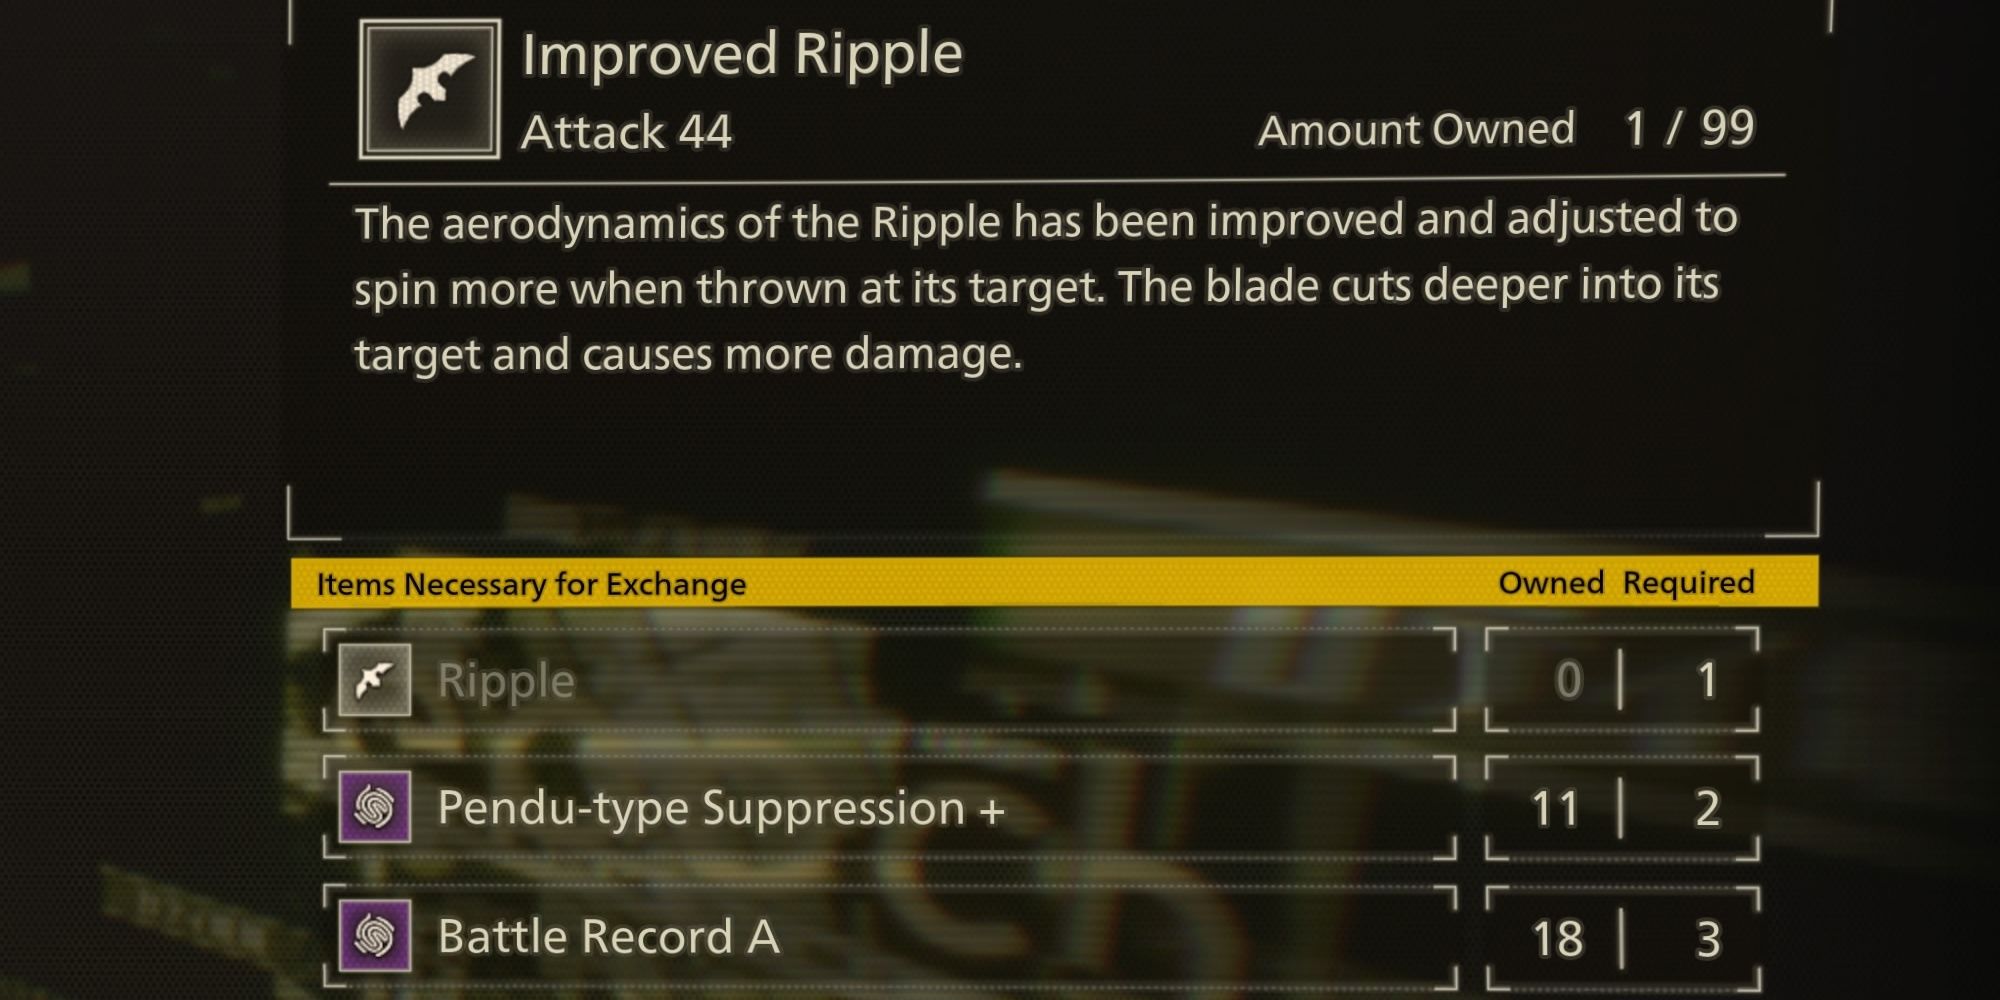 The exchange requirements for a weapon in Scarlet Nexus 